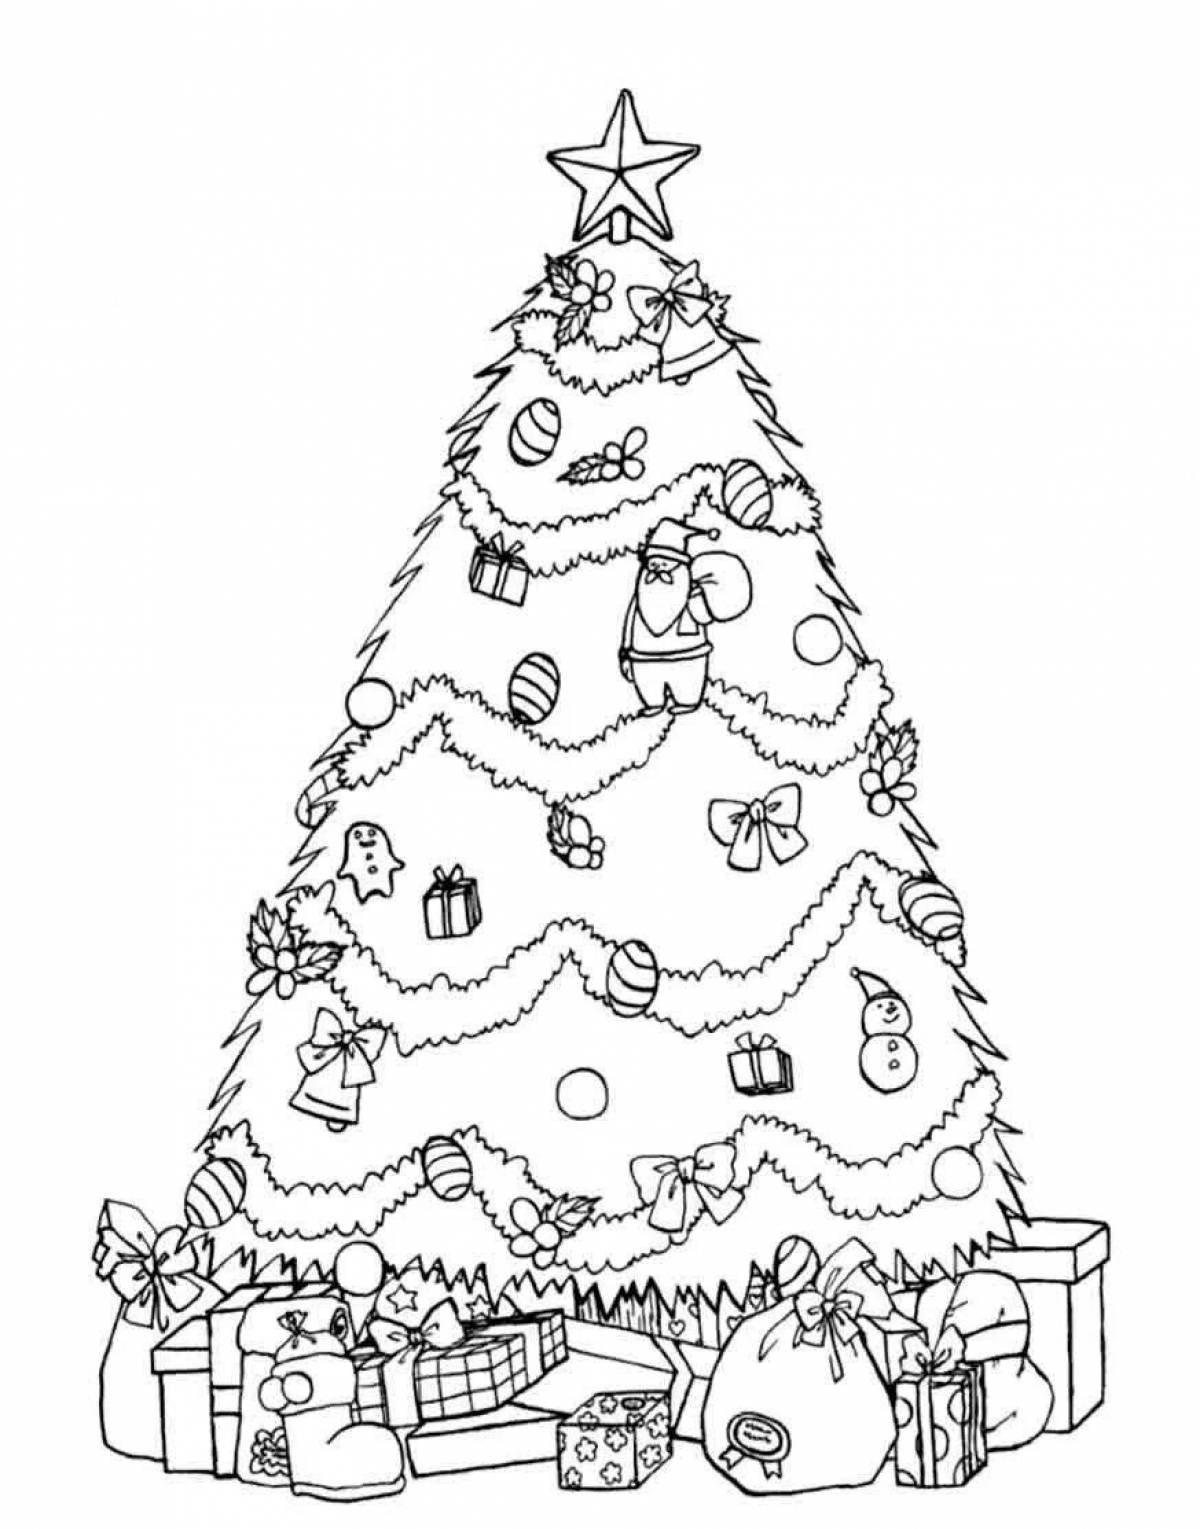 Colourful Christmas tree coloring page